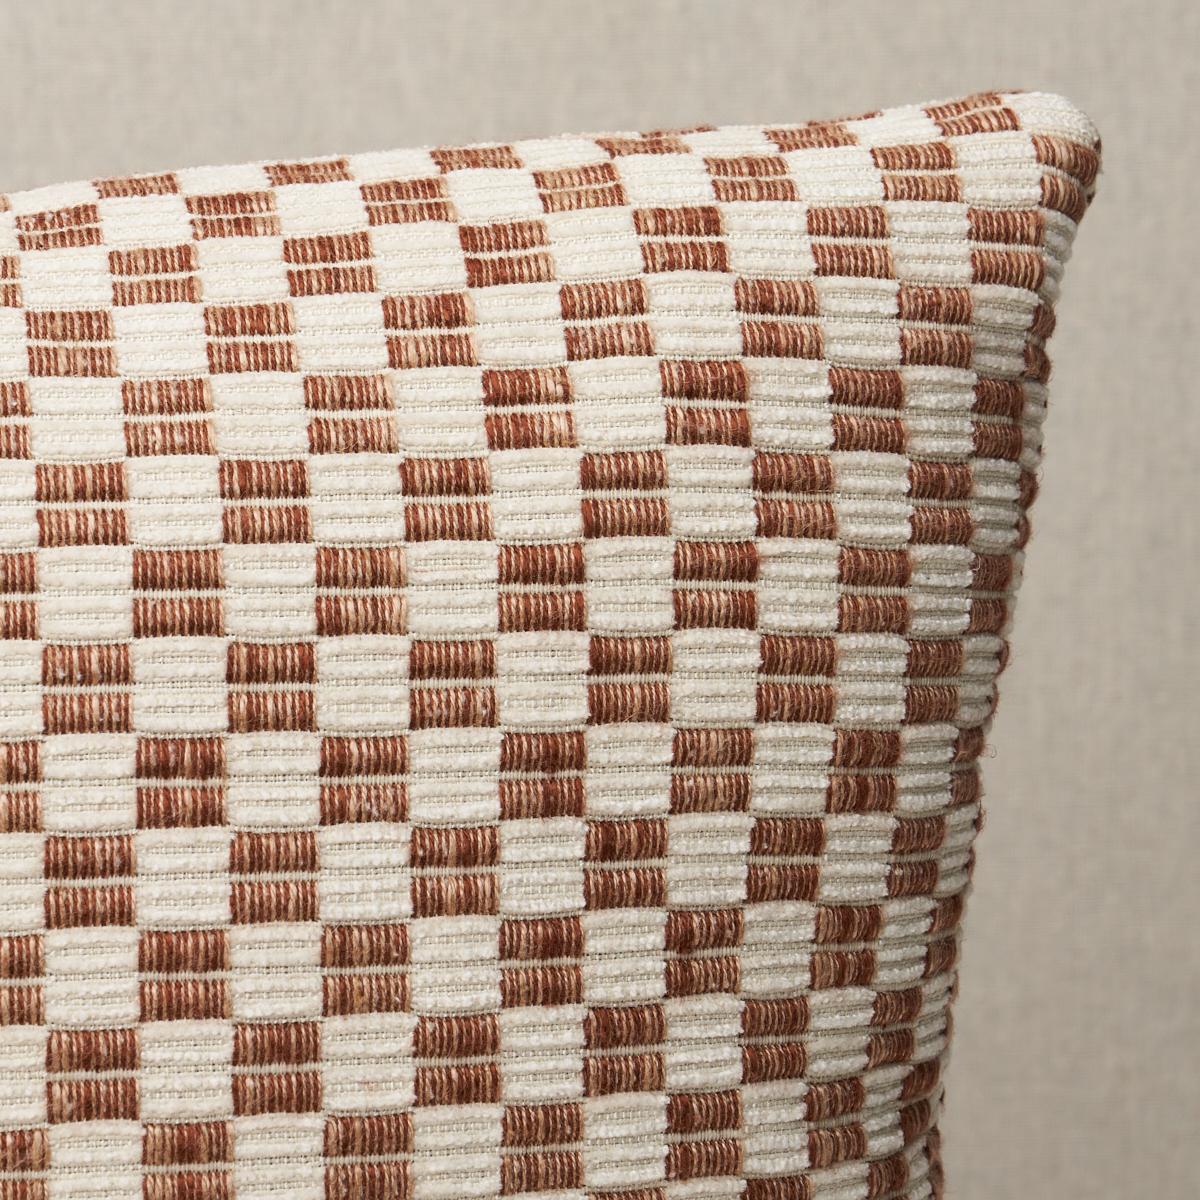 This pillow features Elkart with a knife edge finish. Elkhart is a soft, artisanal small woven check with a wonderfully homespun quality. Pillow includes a feather/down fill insert and hidden zipper closure.